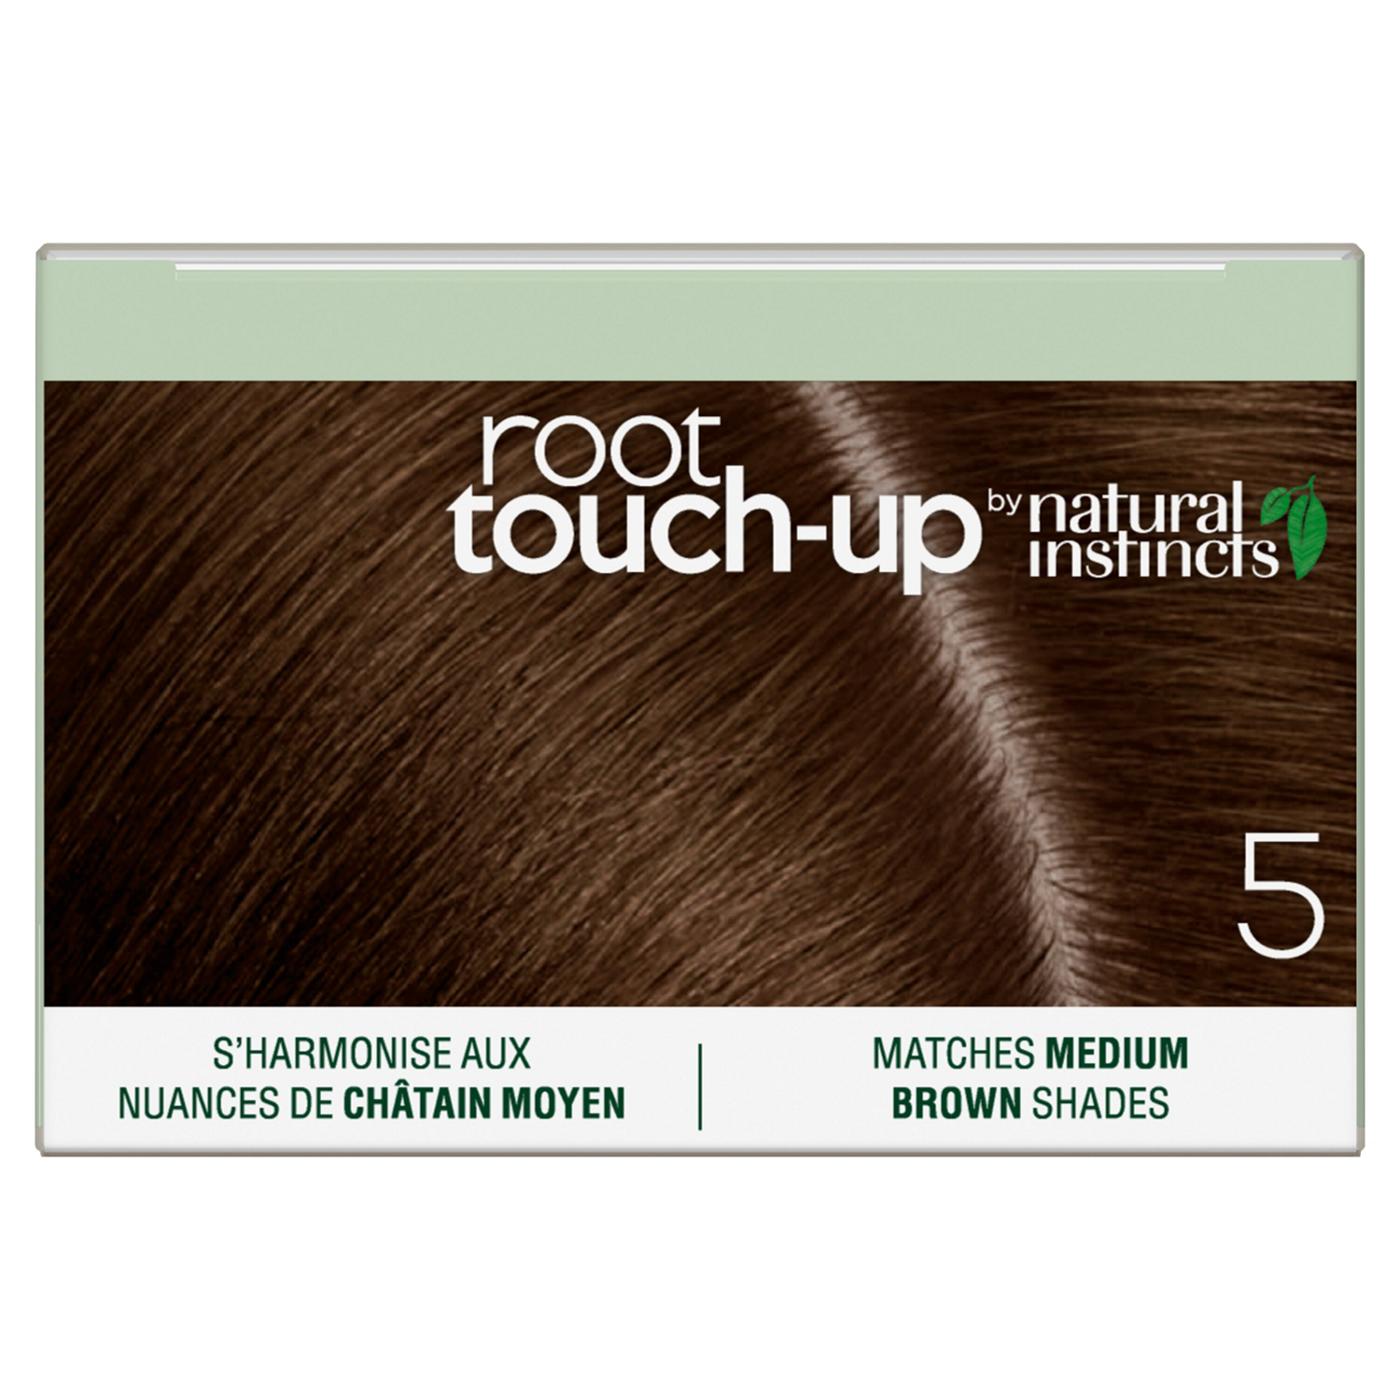 Clairol Root Touch-Up by Natural Instincts Permanent Hair Color 5 Matches Medium Brown Shades; image 4 of 4